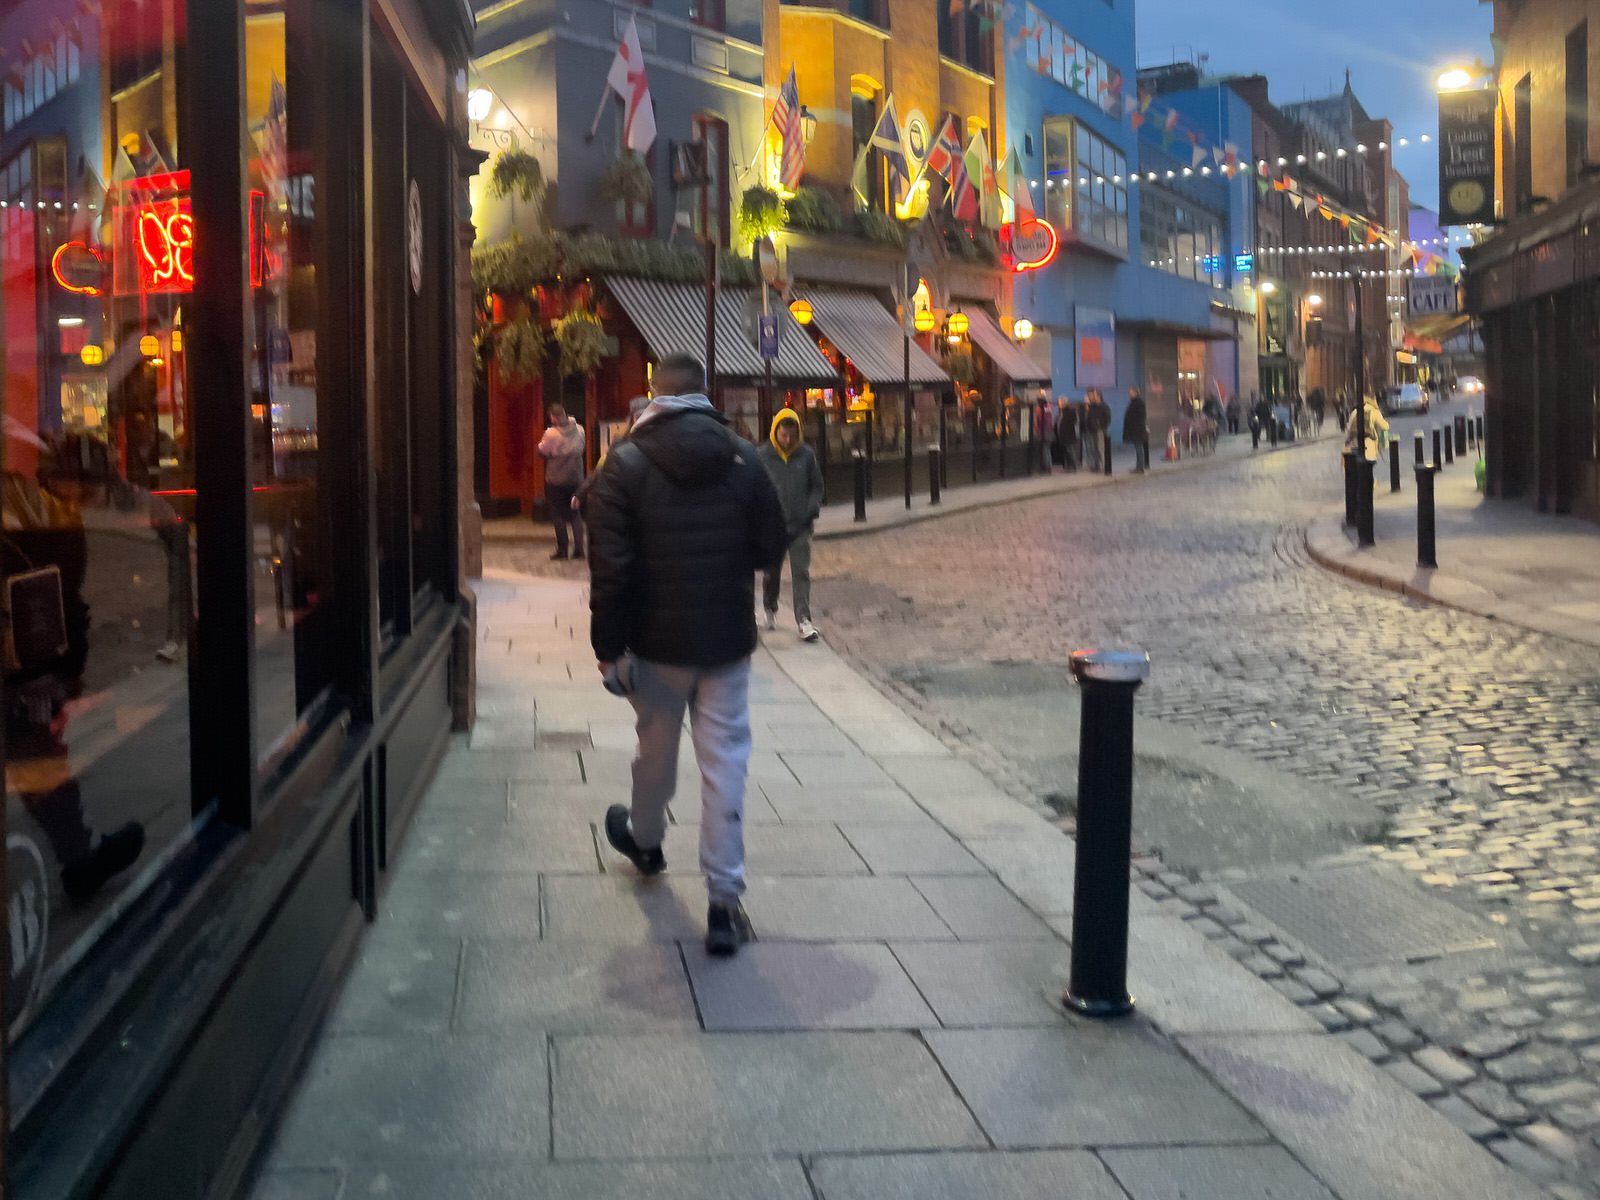 I VISITED TEMPLE BAR TODAY [AS NIGHTFALL WAS APPROACHING]-225366-1